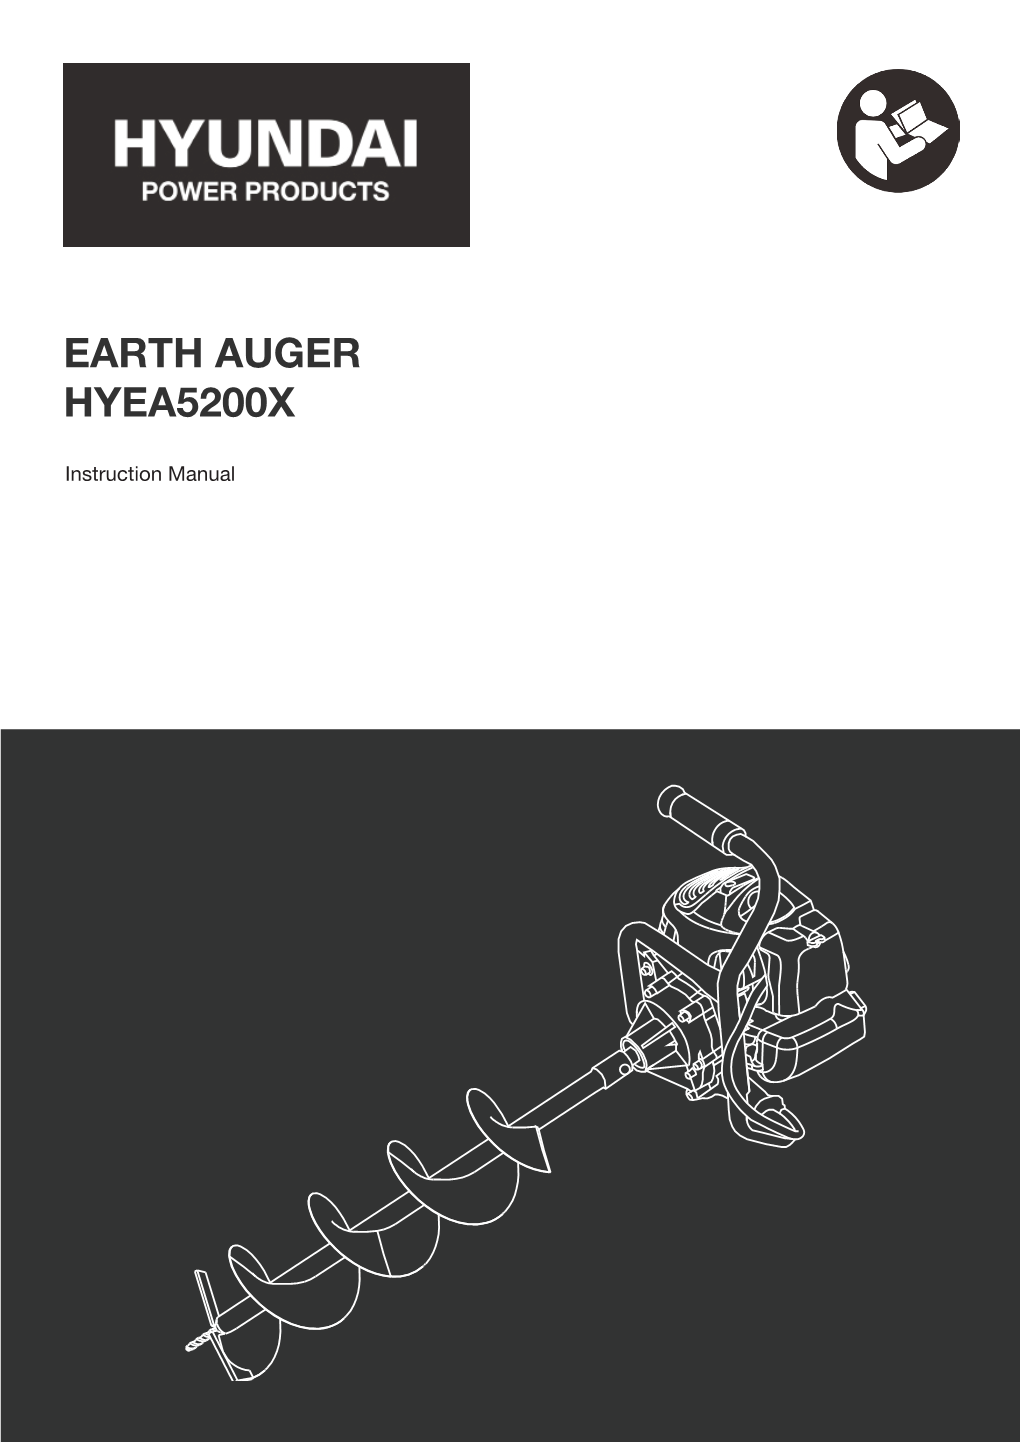 Earth Auger Hyea5200x